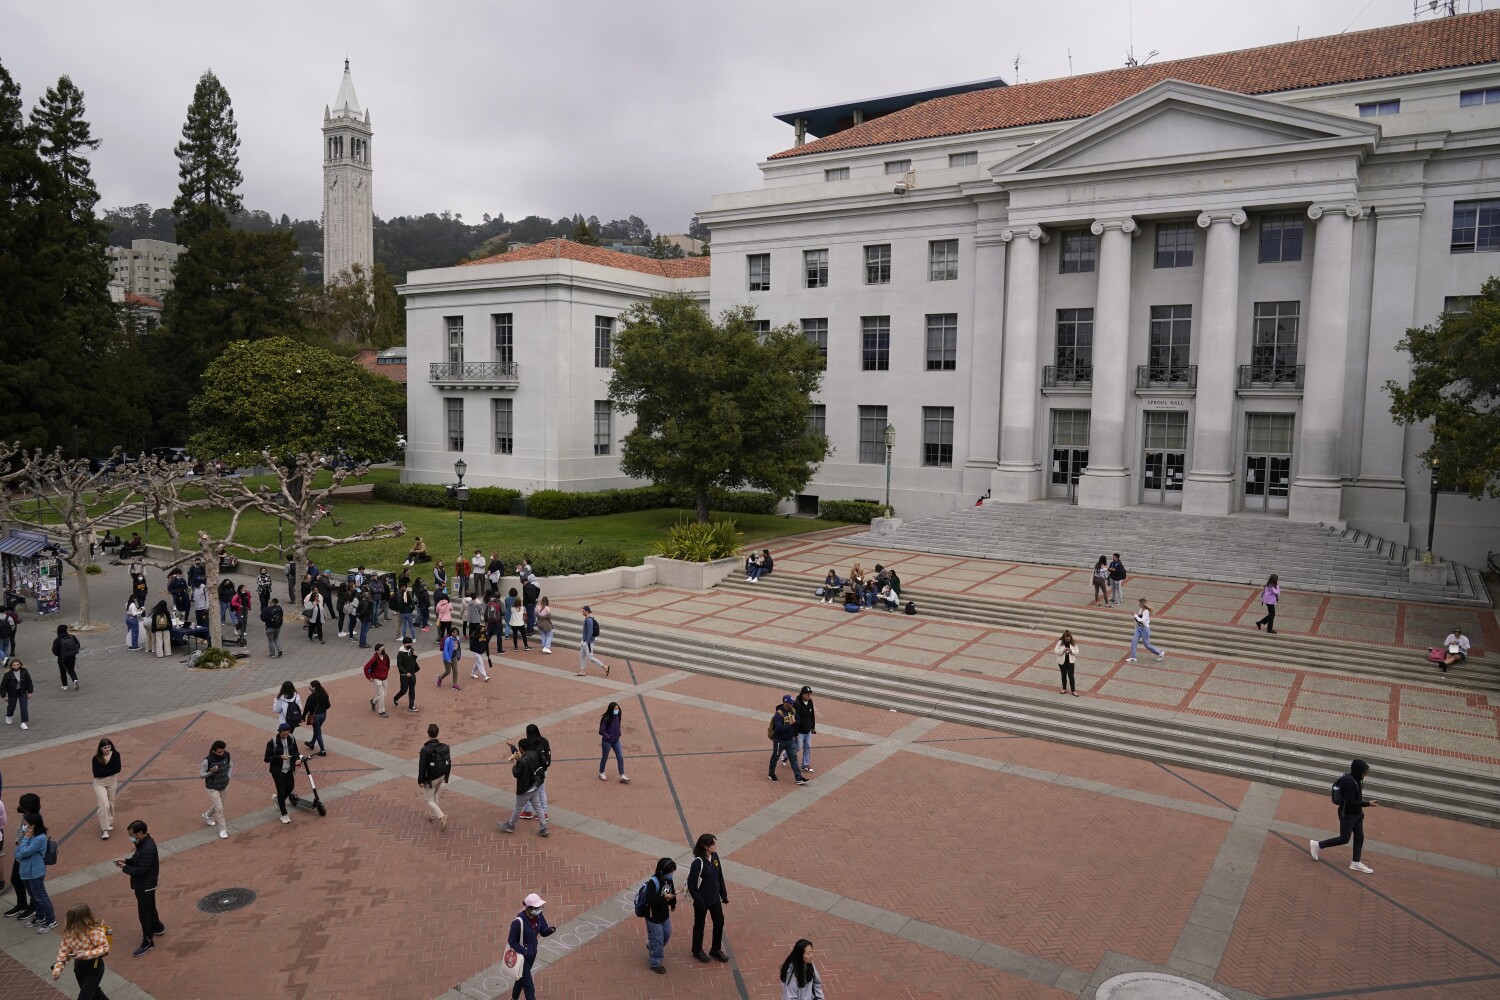 Student arrested after allegedly threatening to shoot staff at UC Berkeley